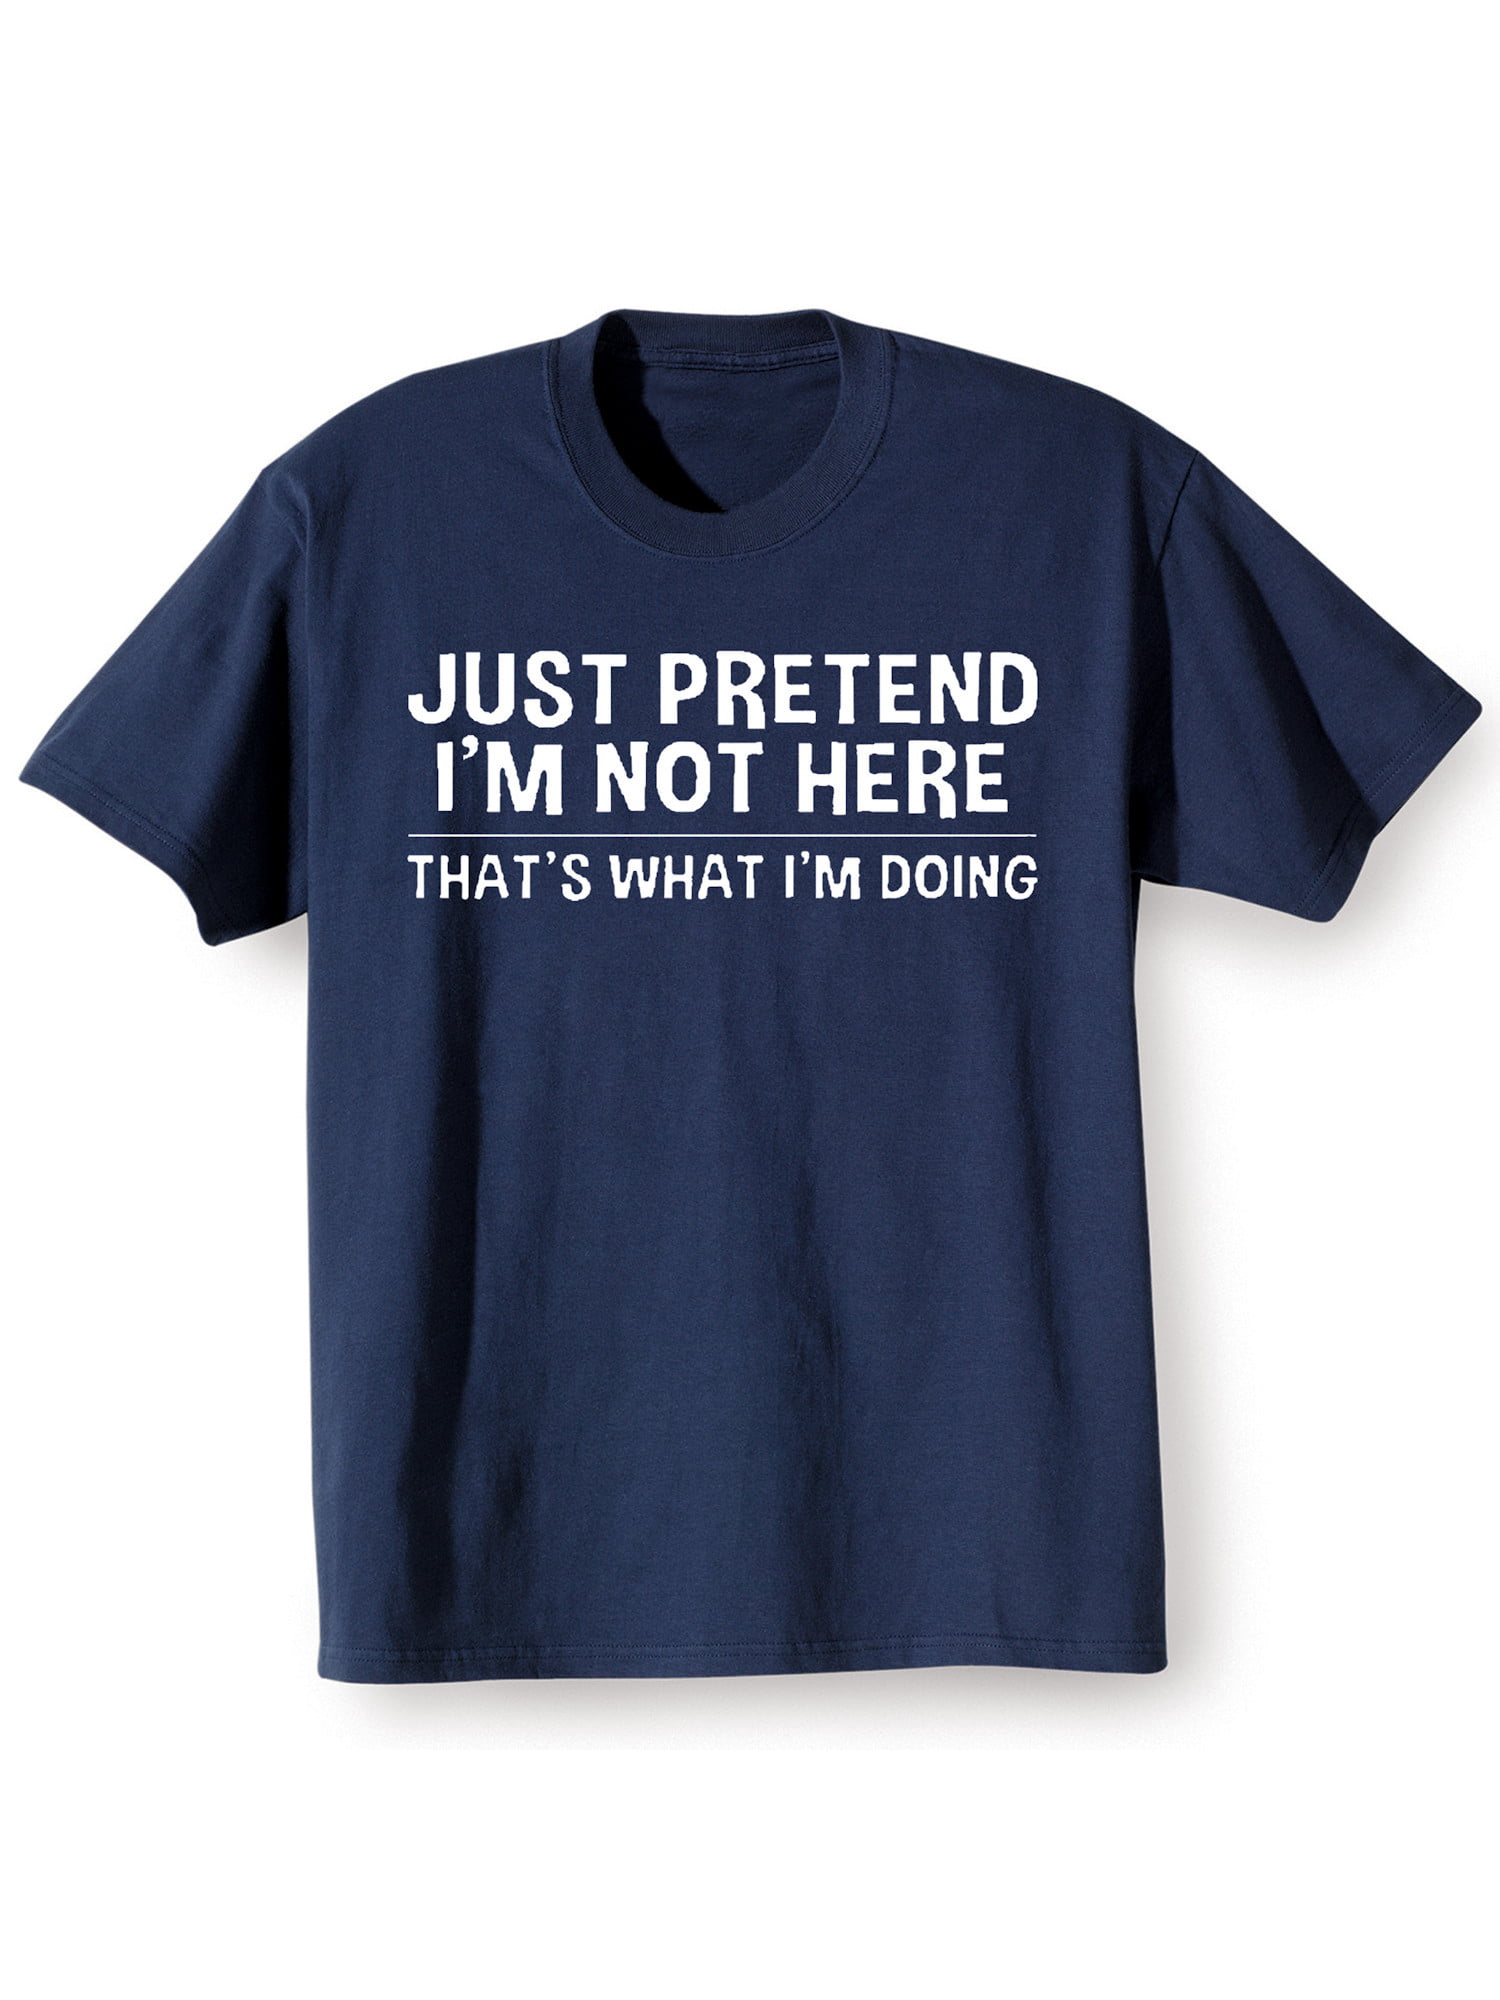 Funny Introvert Shirt Sarcastic T-Shirt I'm a People Person Just Kidding T-Shirt